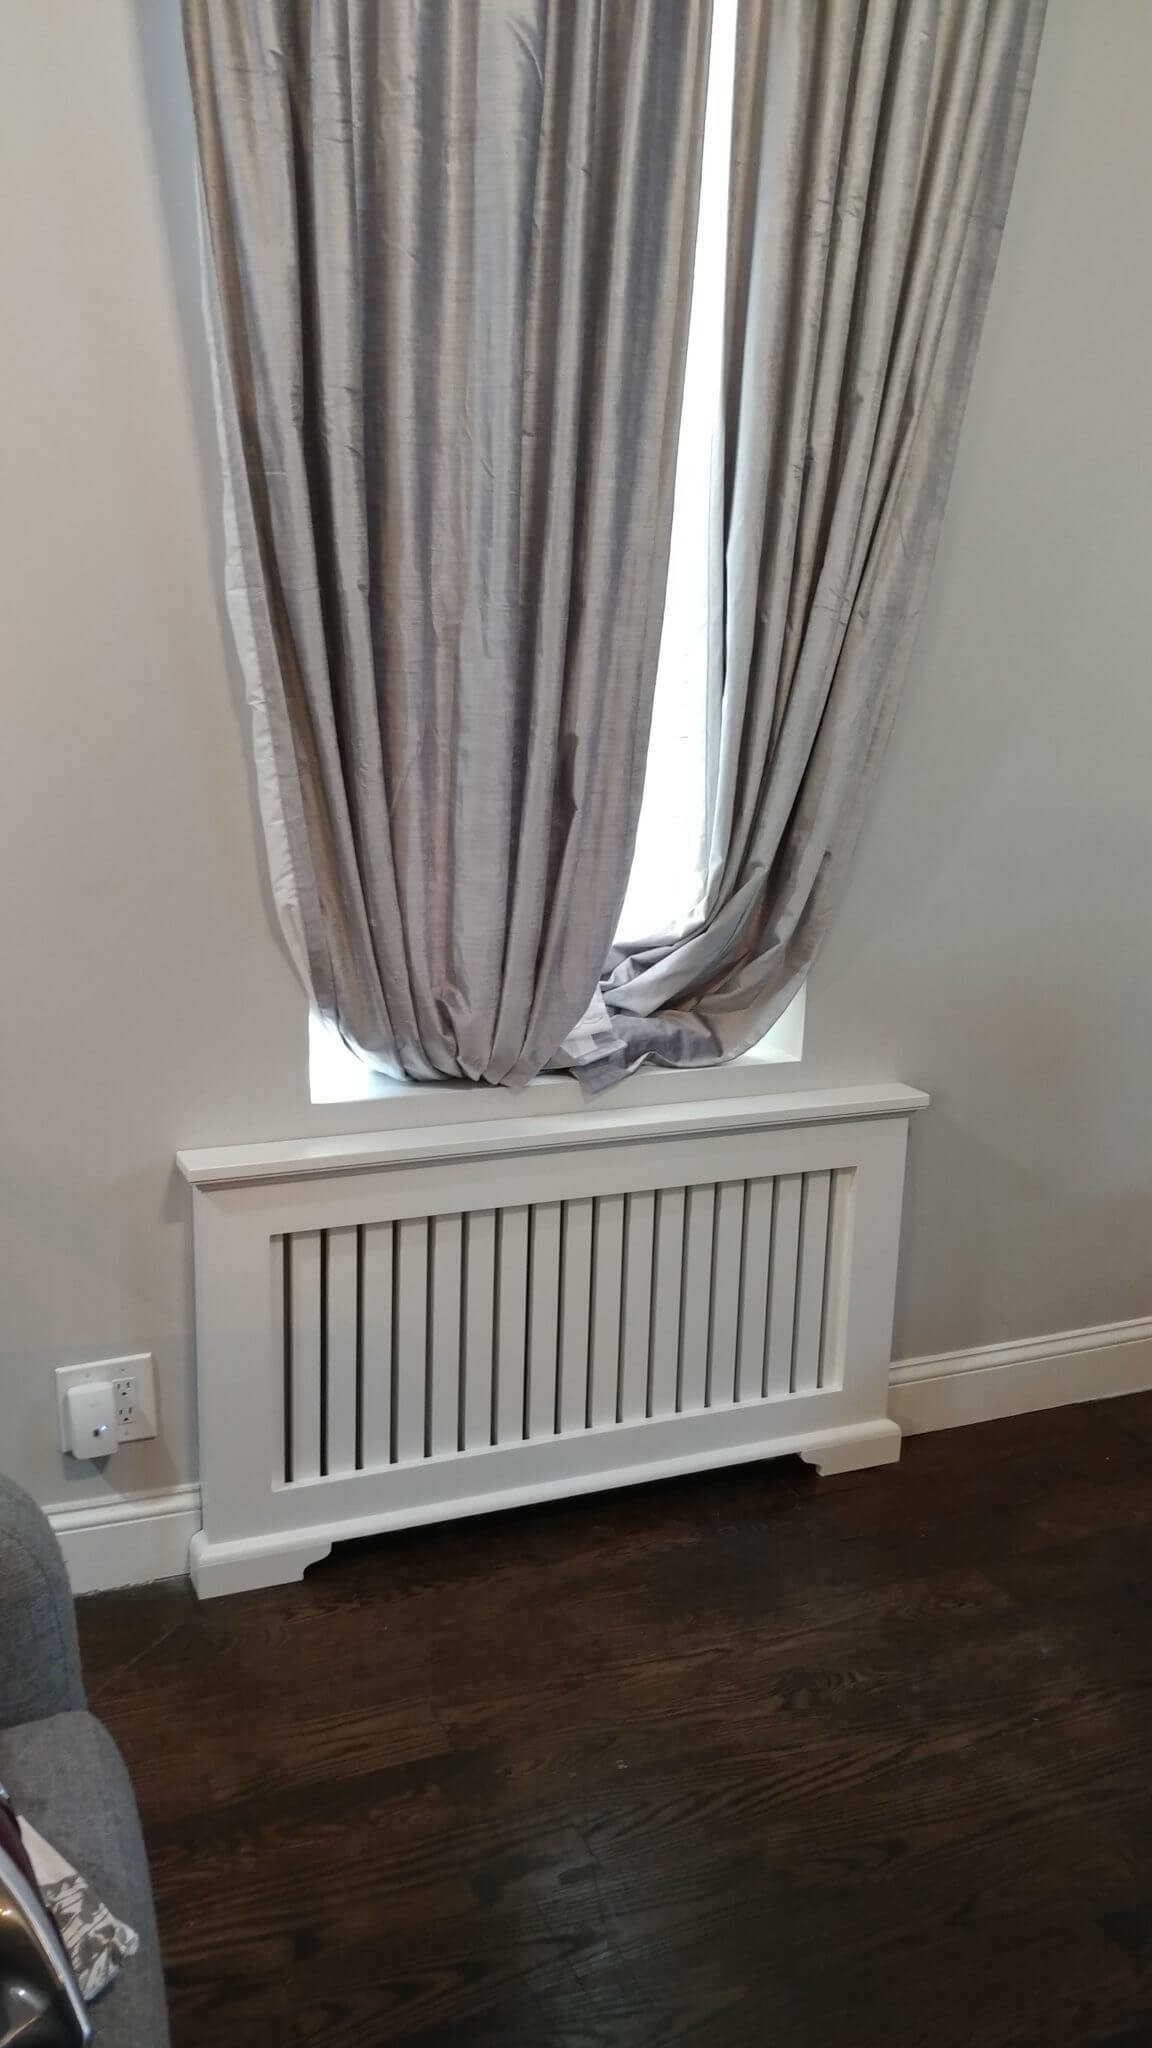 in-wall real wood radiator cover under window